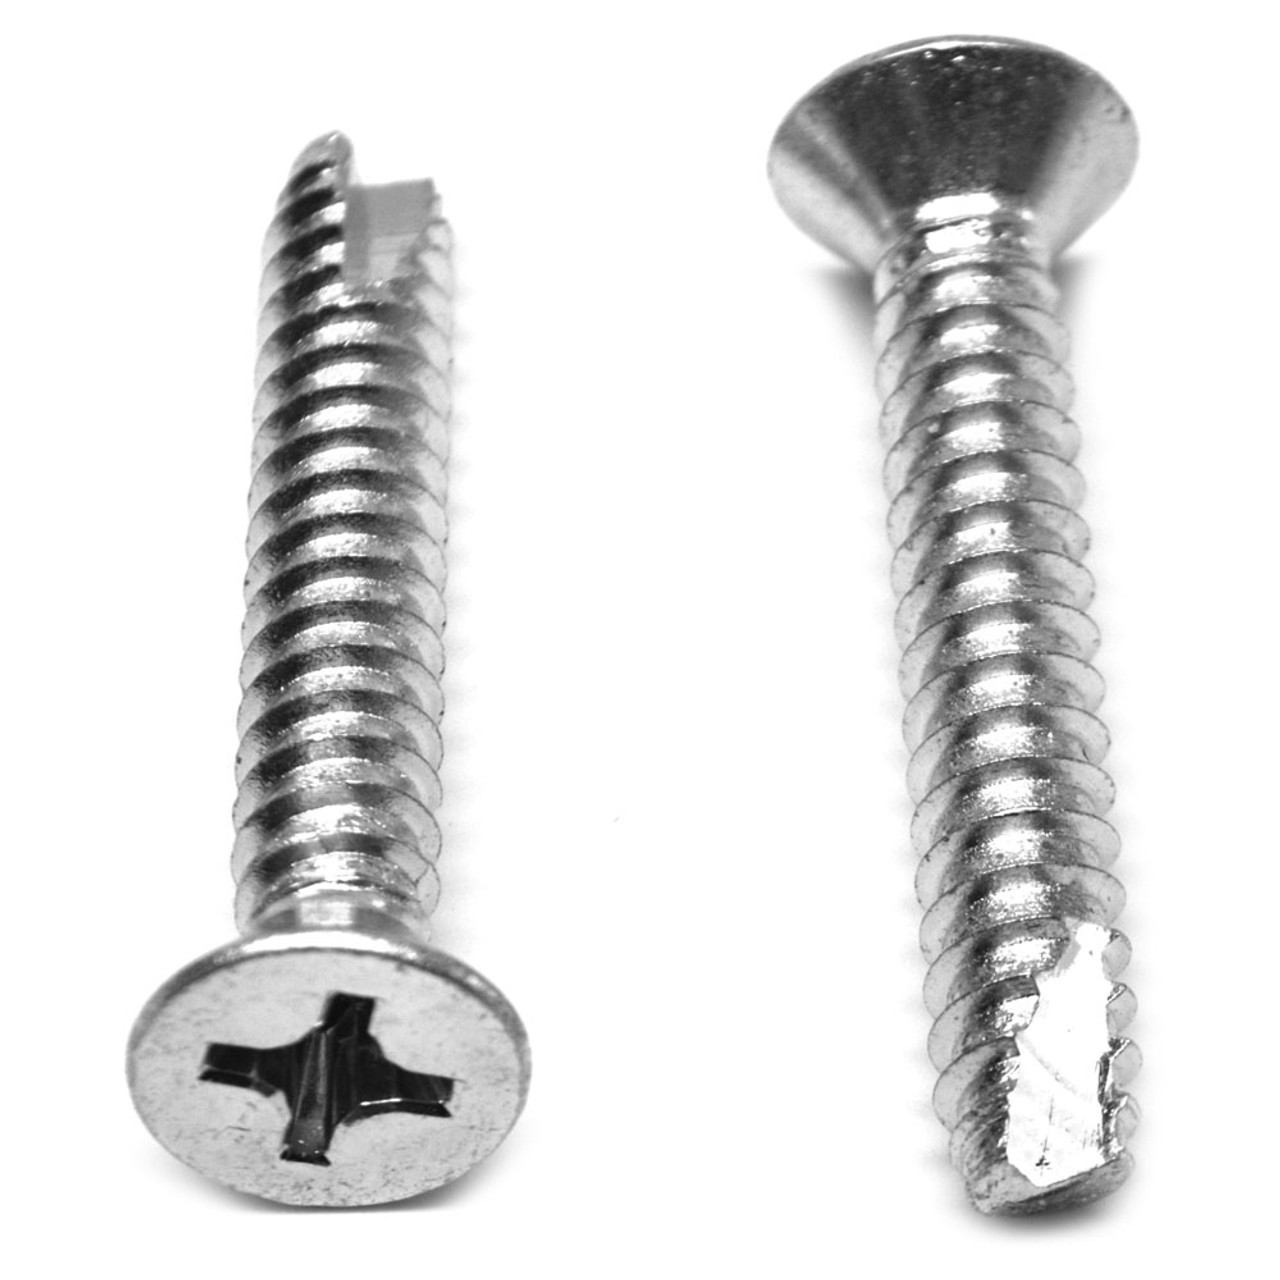 Qty 250 Chipboard Screw Phillip 8g x 57mm Galvanised CL3 CSK Treated Pine Galv 